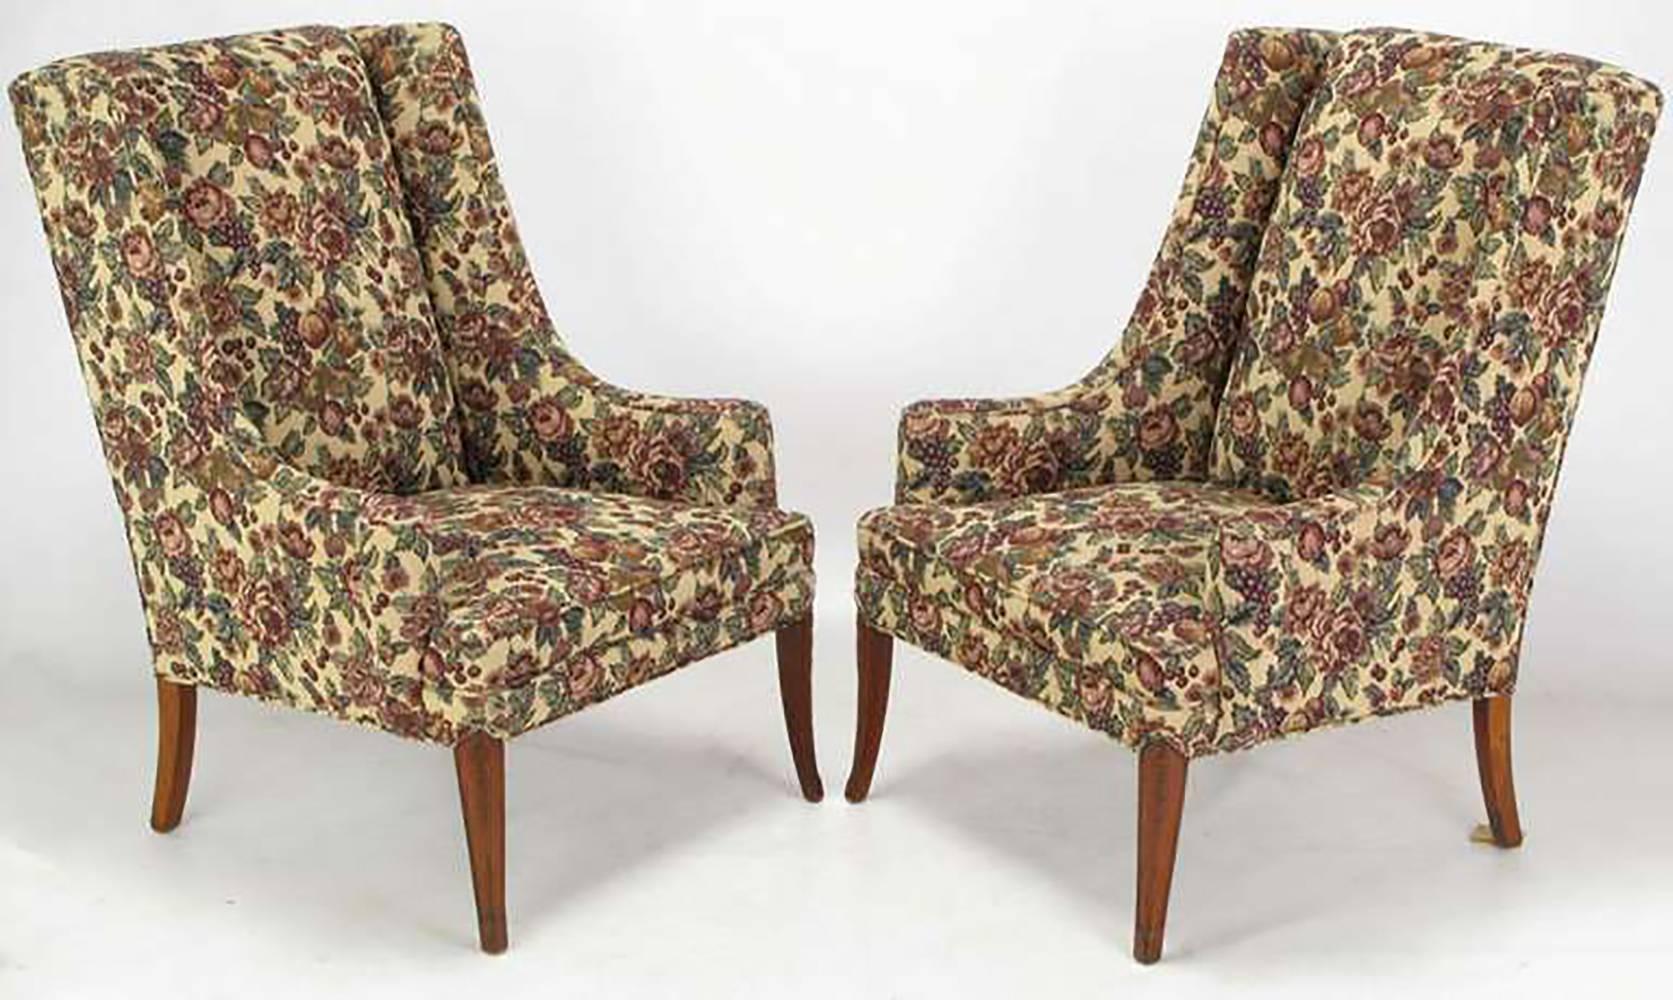 Pair of circa 1940s low arm wing chairs upholstered in a fruit and foliage tapestry. Mahogany saber legs have a lightly carved detail. In a similar style to early Grosfeld House with low turned arms and exaggerated rake to the chair back.